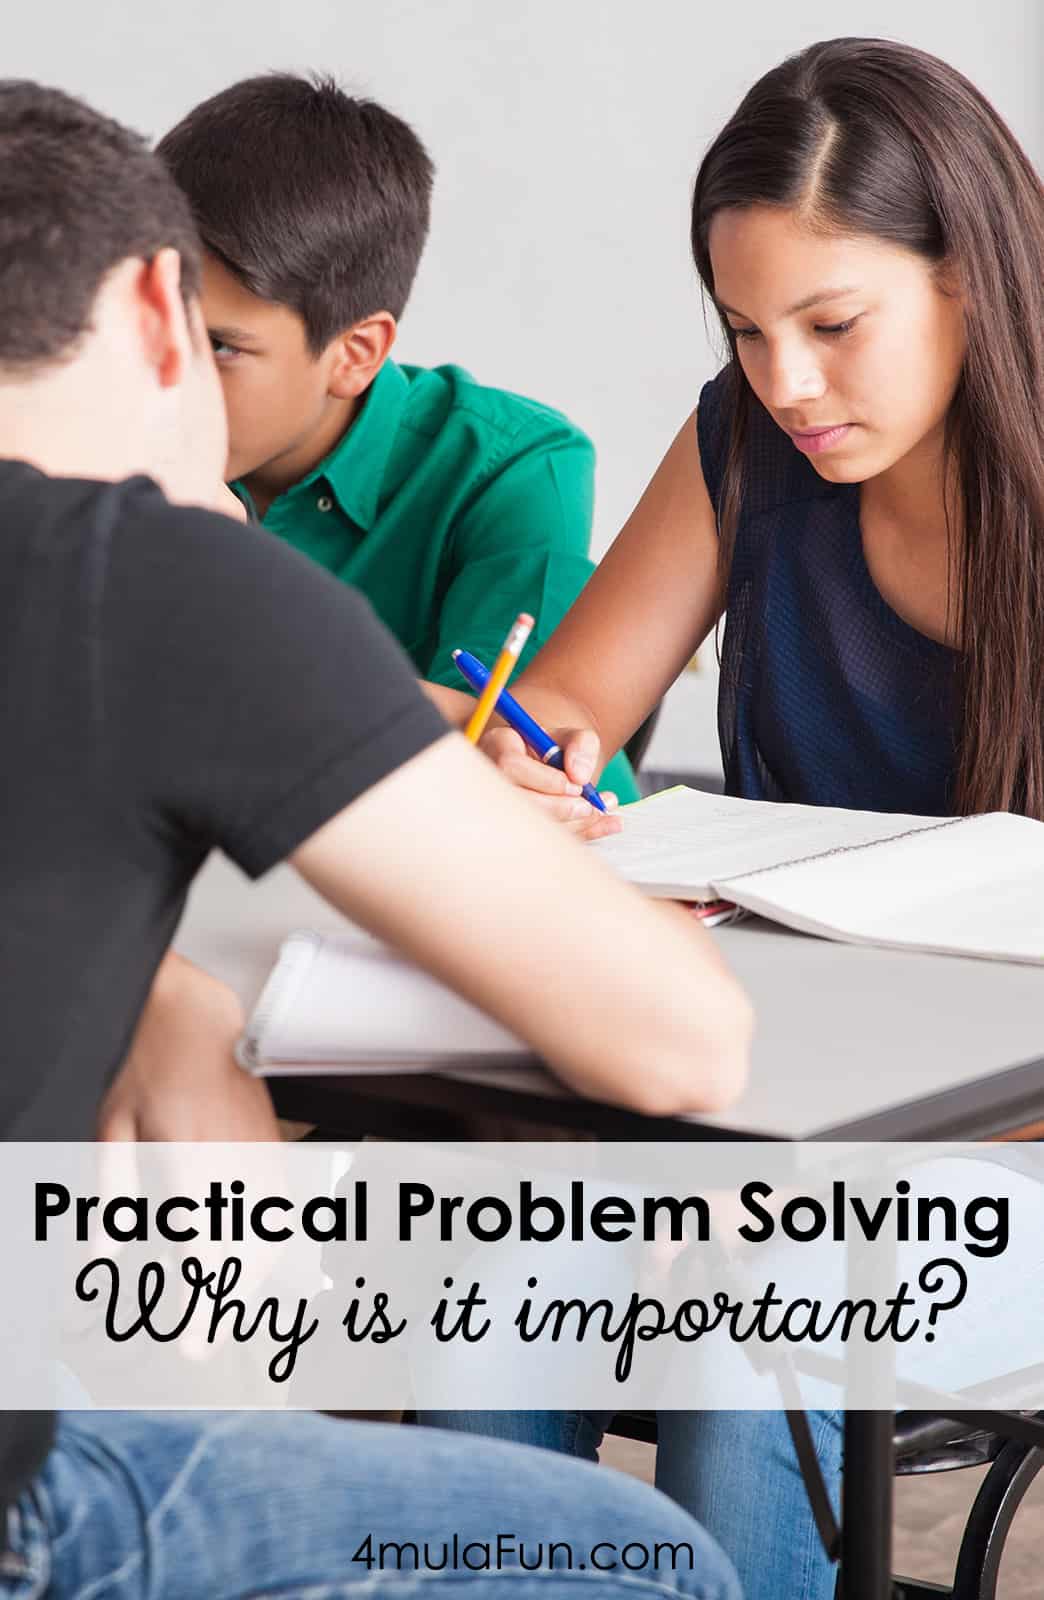 Practical Problem Solving is crucial for our students each year. We must give them the tools to think critically so they can develop better problem solving skills.